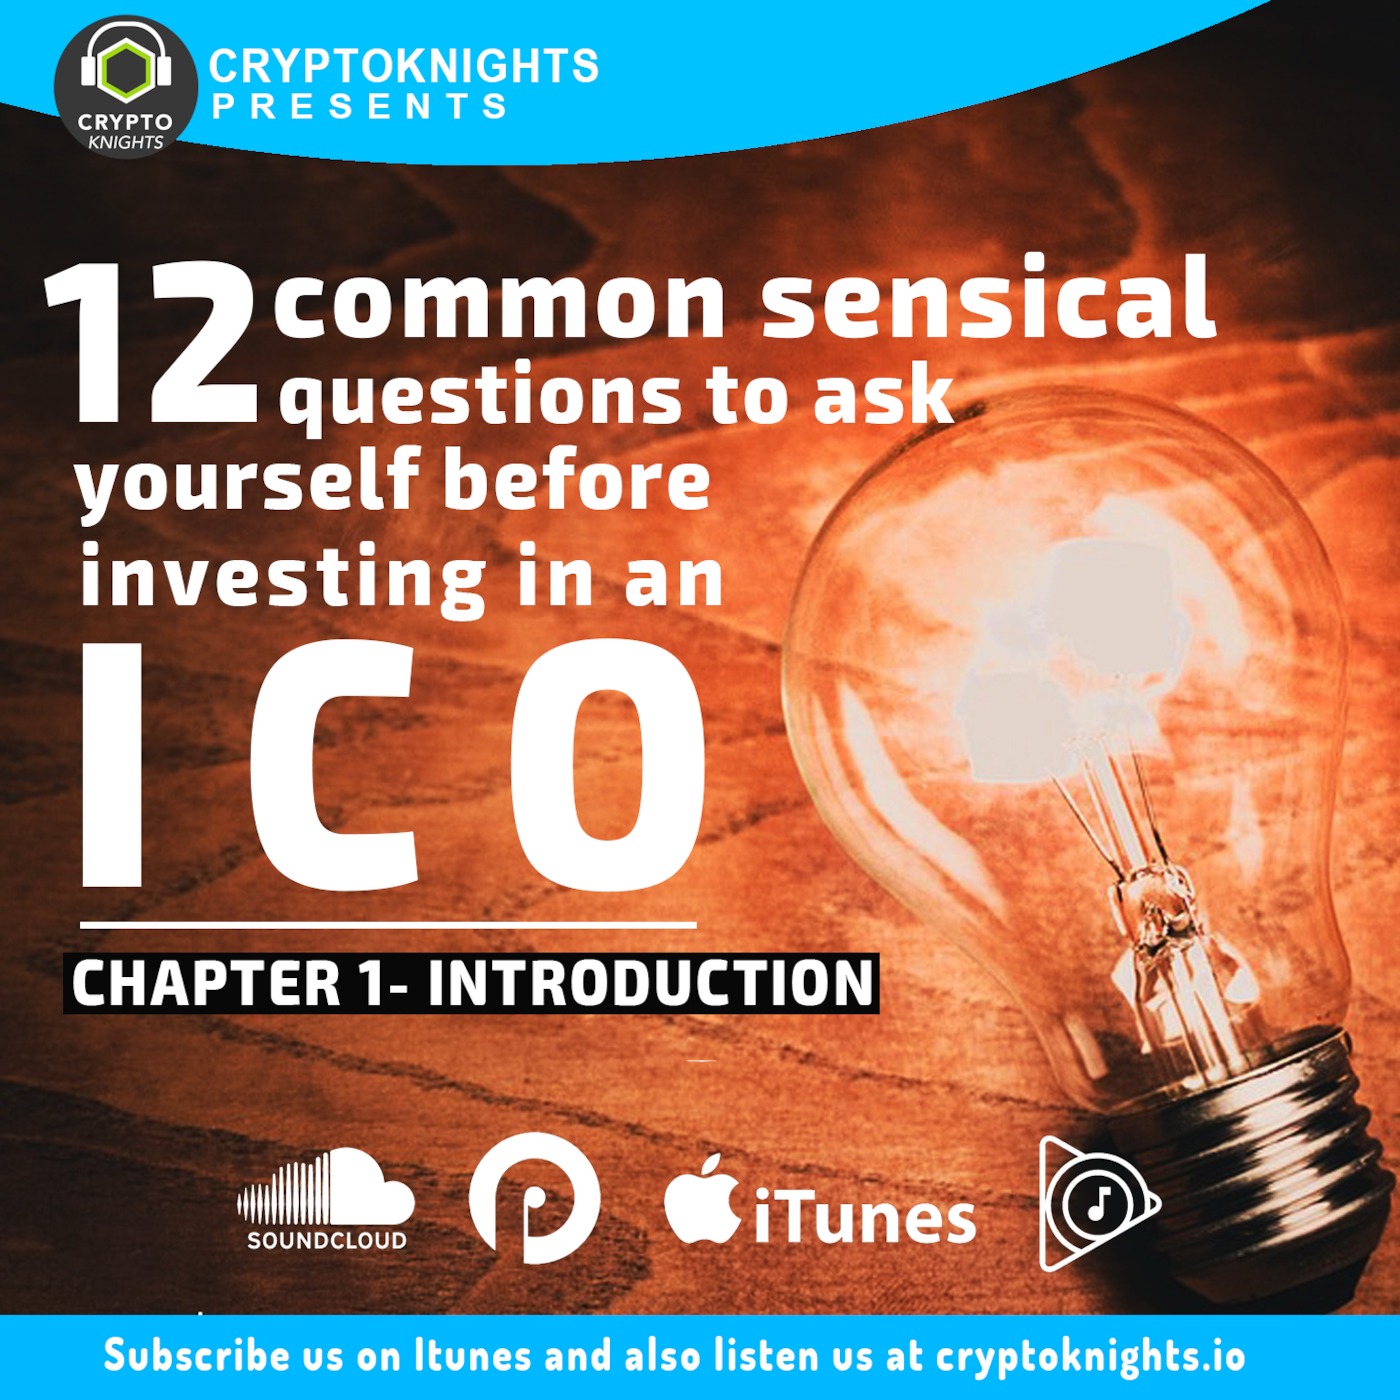 12 Common Sensical Questions to Ask Yourself Before Investing in an ICO. Chapter 1- INTRODUCTION